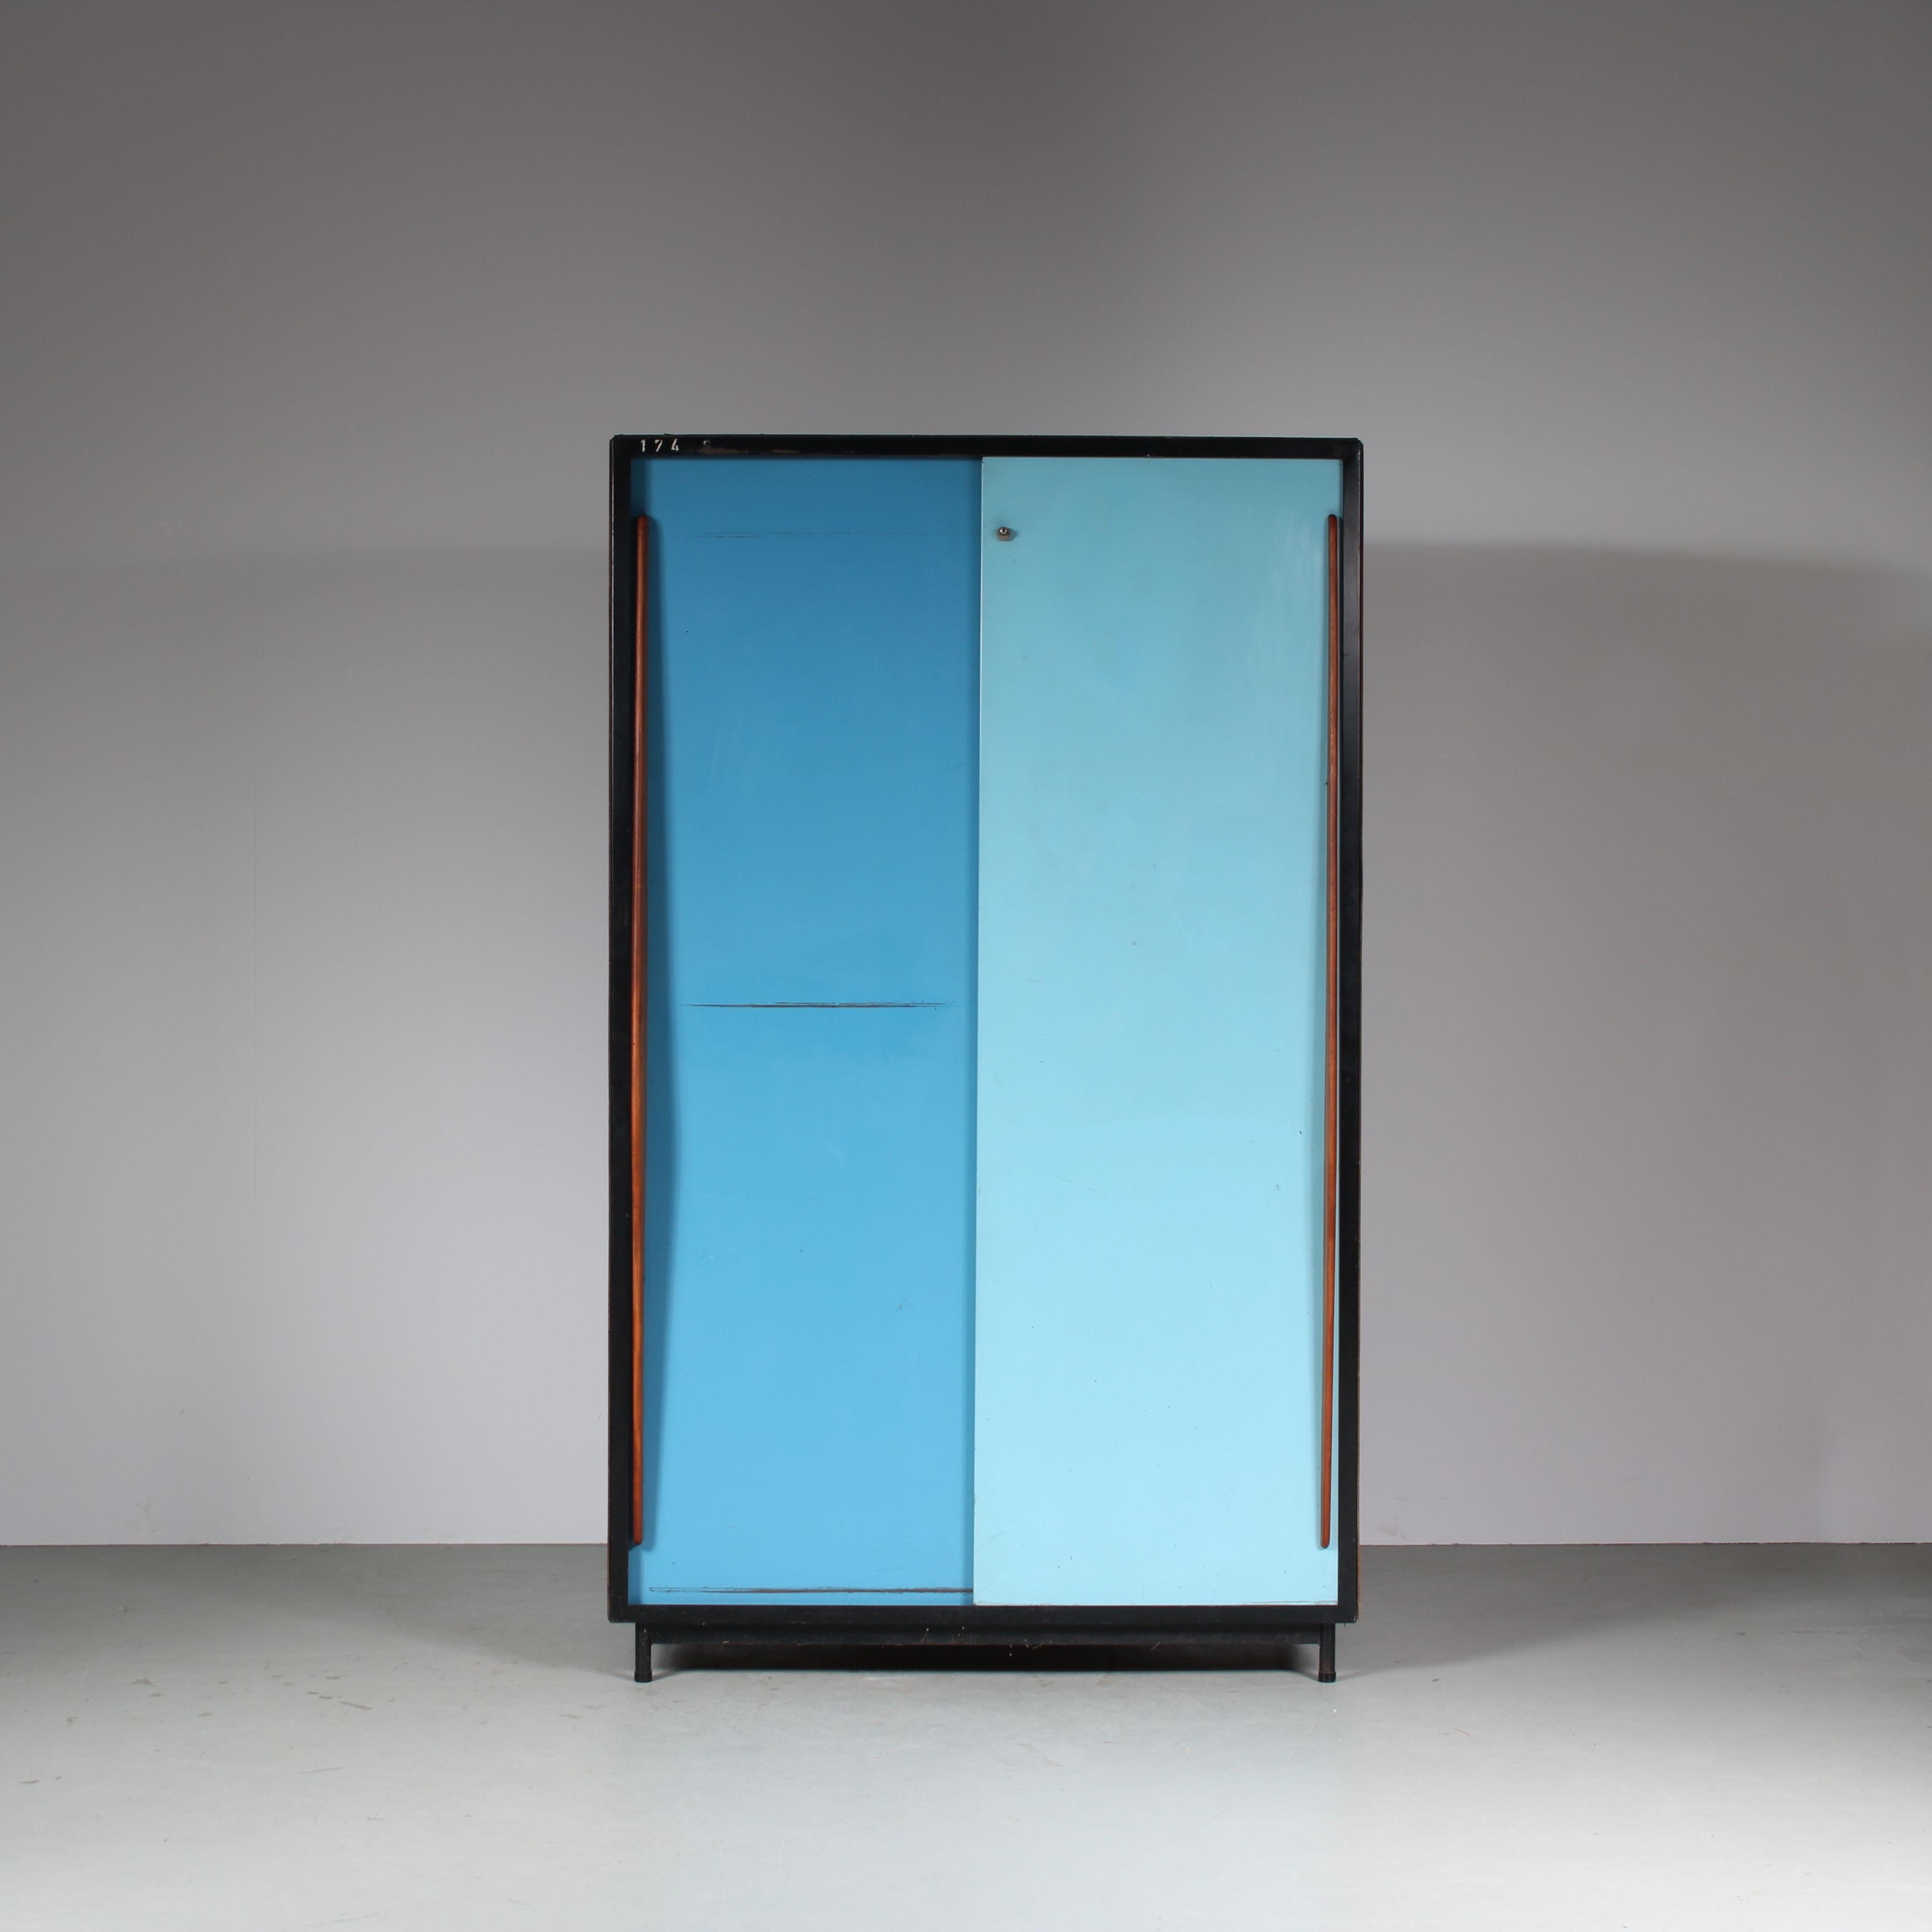 A fantastic large wardrobe designed by Willy Van Der Meeren, manufactured by Tubax in Belgium in 1952.

This eye-catching, rare piece is made of beautiful quality wood on a black metal structure. The large metal sliding doors are both executed in a